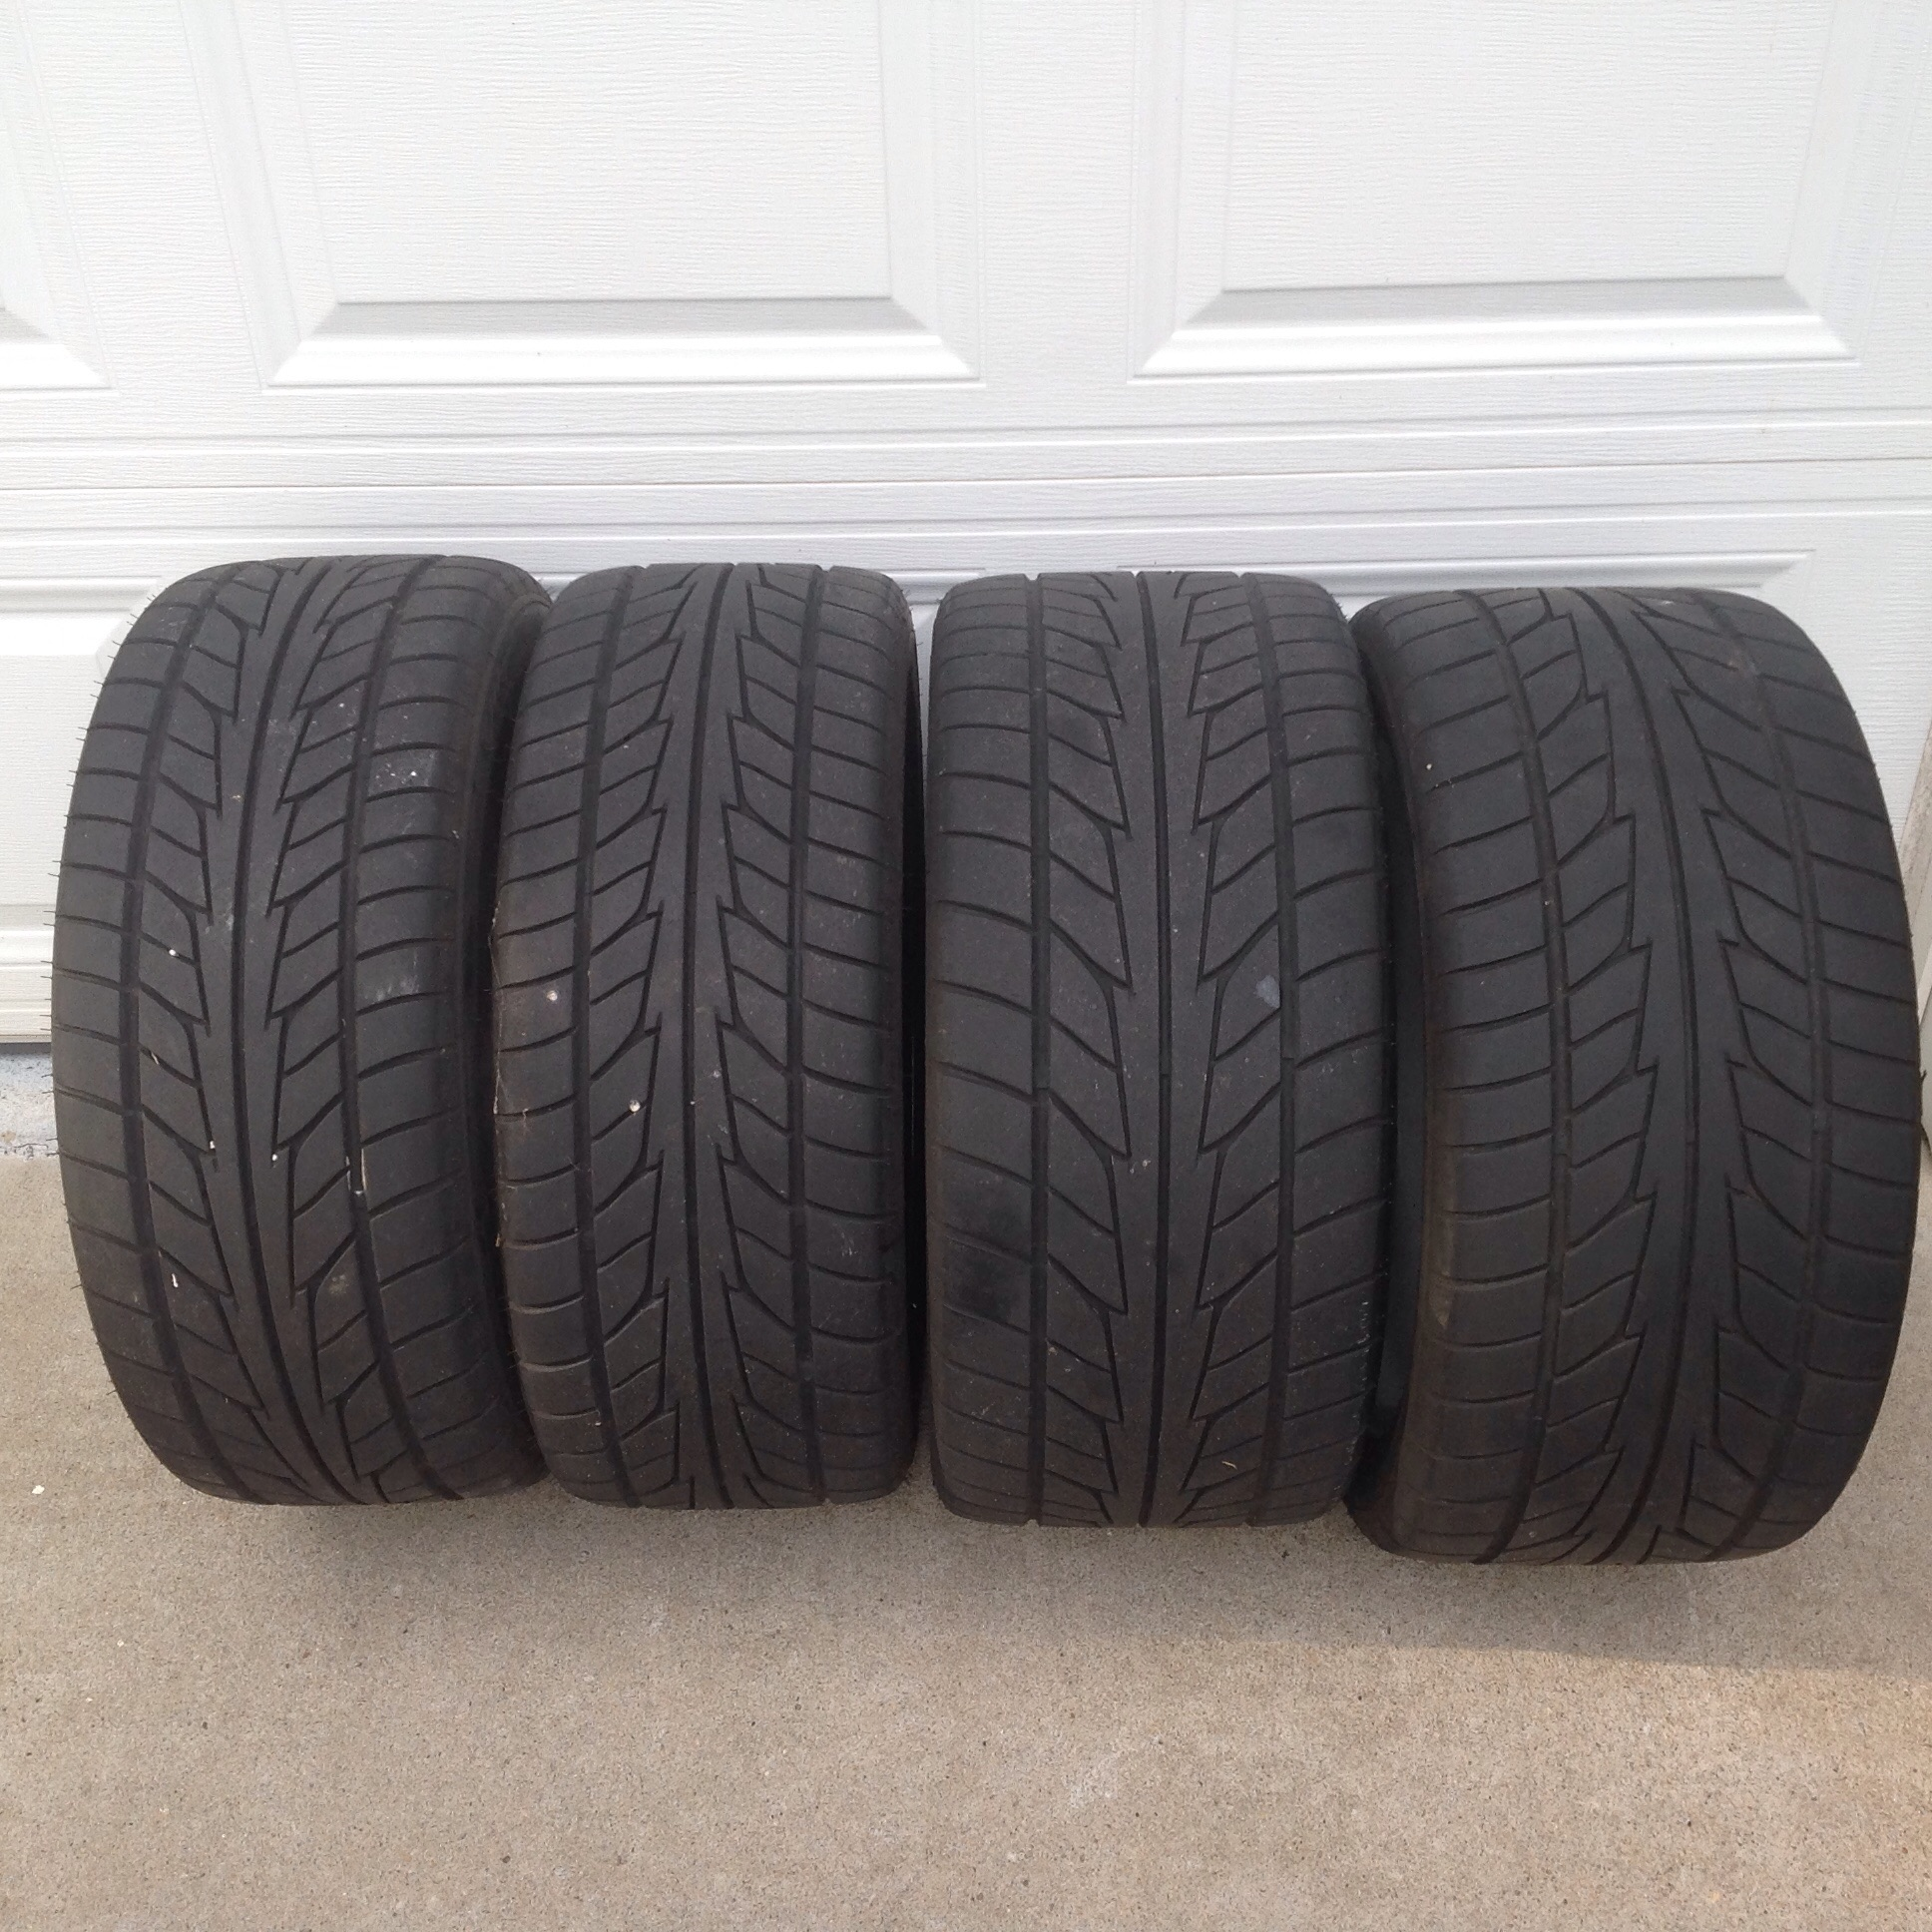 Tires with different widths